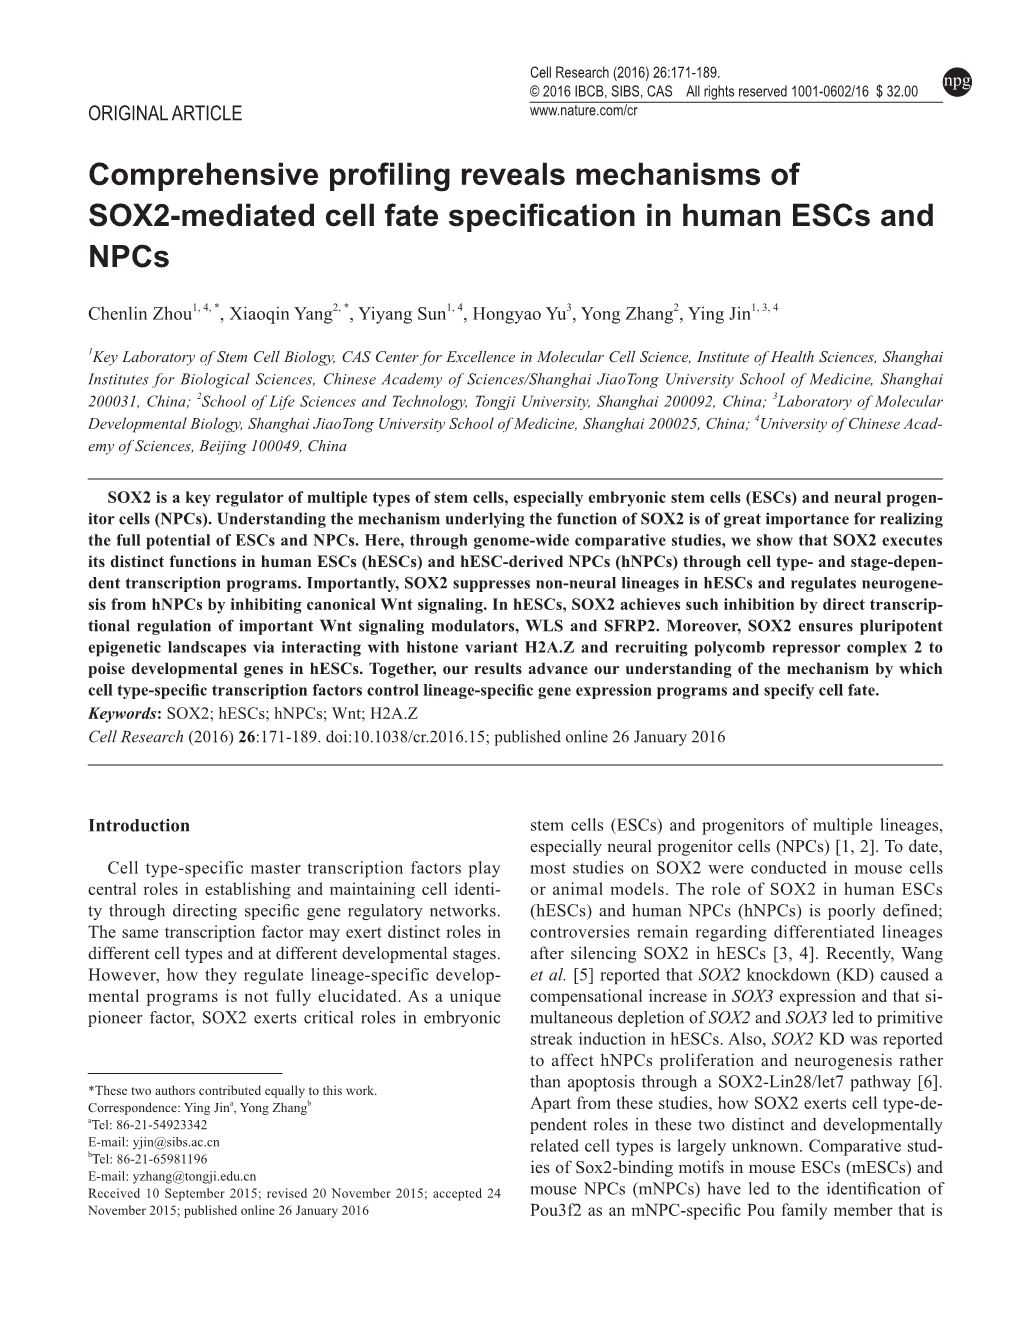 Comprehensive Profiling Reveals Mechanisms of SOX2-Mediated Cell Fate Specification in Human Escs and Npcs